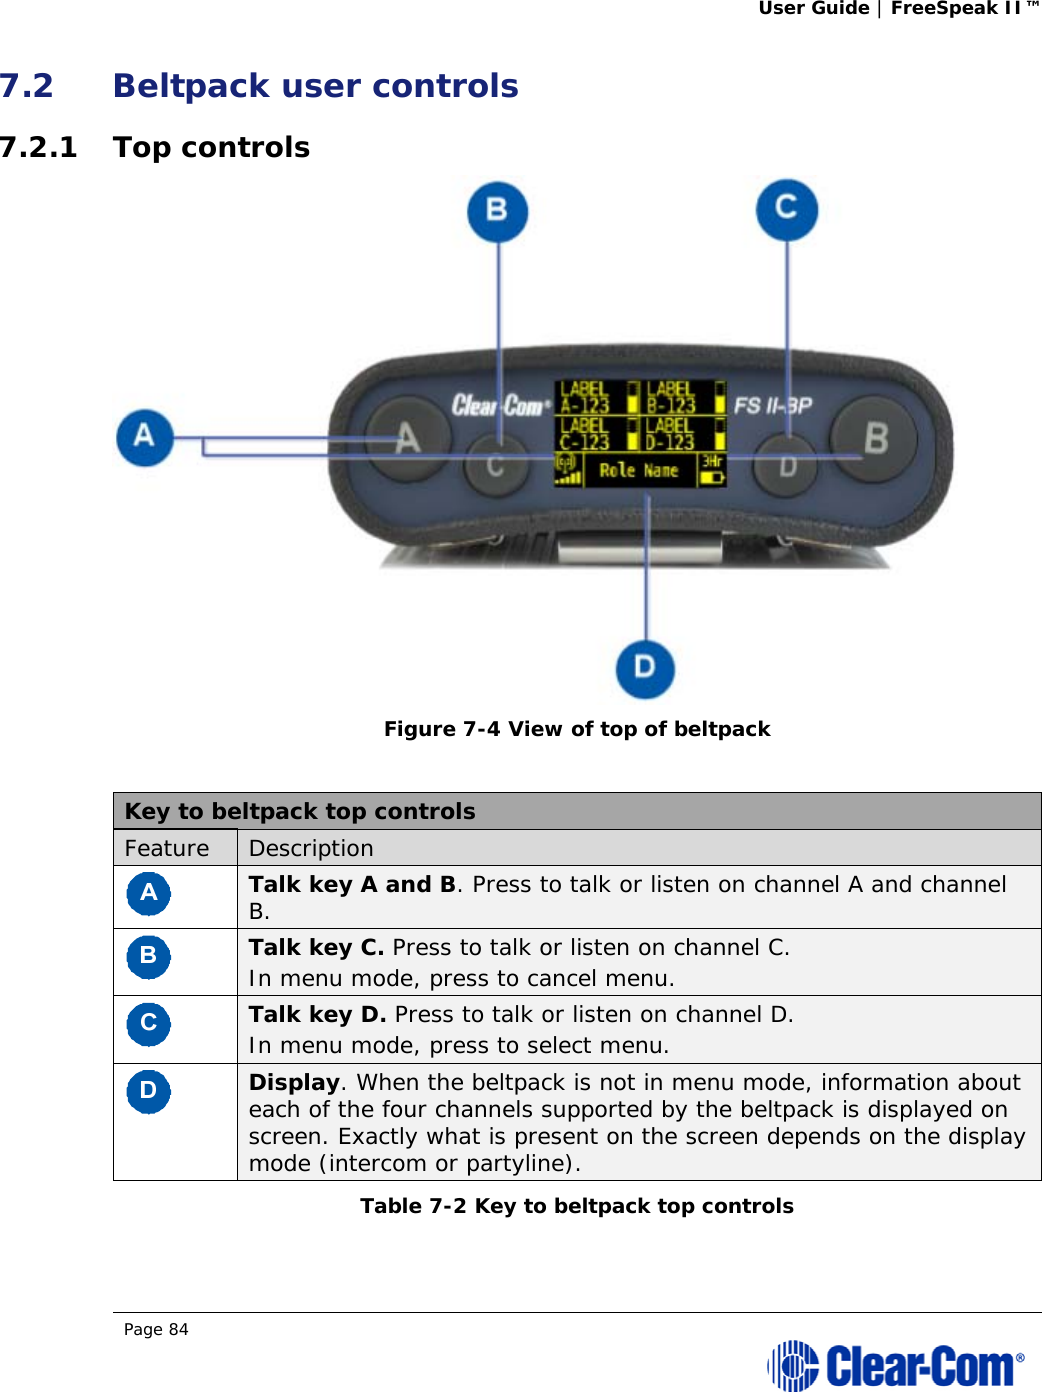 User Guide | FreeSpeak II™  Page 84  7.2 Beltpack user controls 7.2.1 Top controls  Figure 7-4 View of top of beltpack  Key to beltpack top controls Feature  Description  Talk key A and B. Press to talk or listen on channel A and channel B.  Talk key C. Press to talk or listen on channel C. In menu mode, press to cancel menu.  Talk key D. Press to talk or listen on channel D. In menu mode, press to select menu.  Display. When the beltpack is not in menu mode, information about each of the four channels supported by the beltpack is displayed on screen. Exactly what is present on the screen depends on the display mode (intercom or partyline). Table 7-2 Key to beltpack top controls   